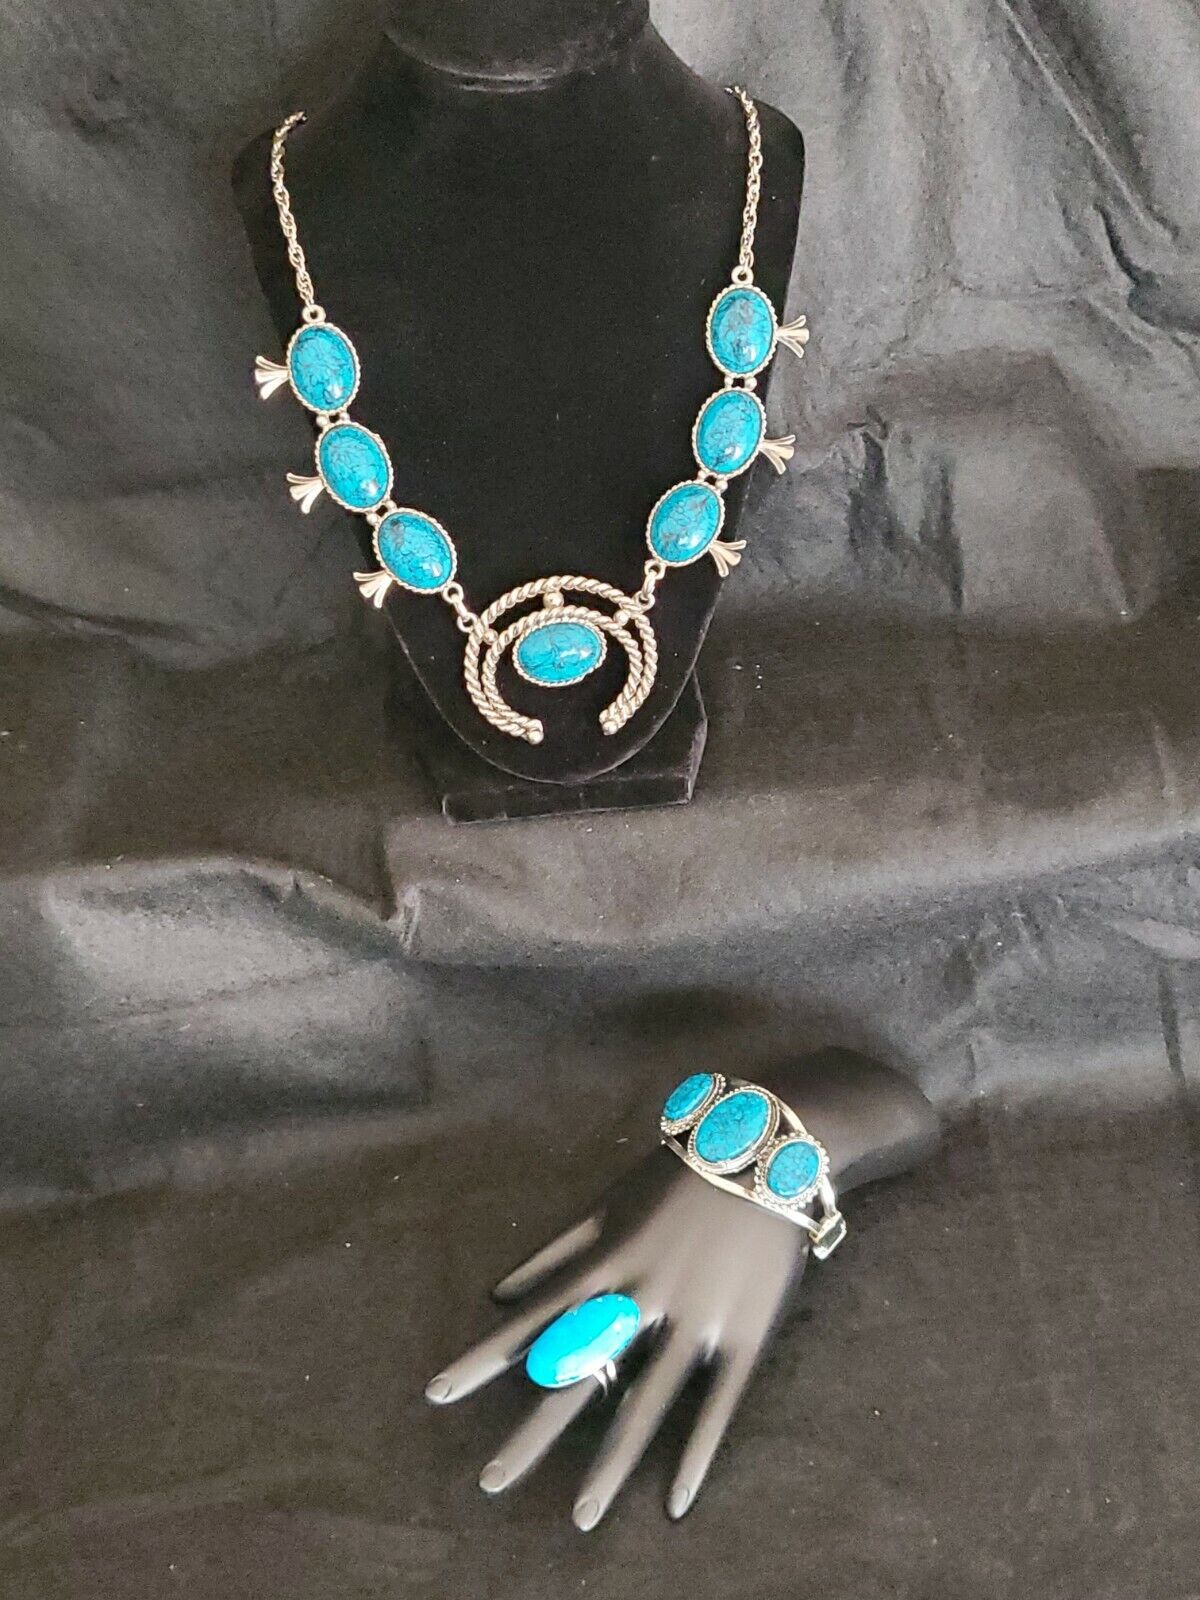 Stunning Native American Inspired  Squash Blossom Necklace Bracelet and Ring Unbranded